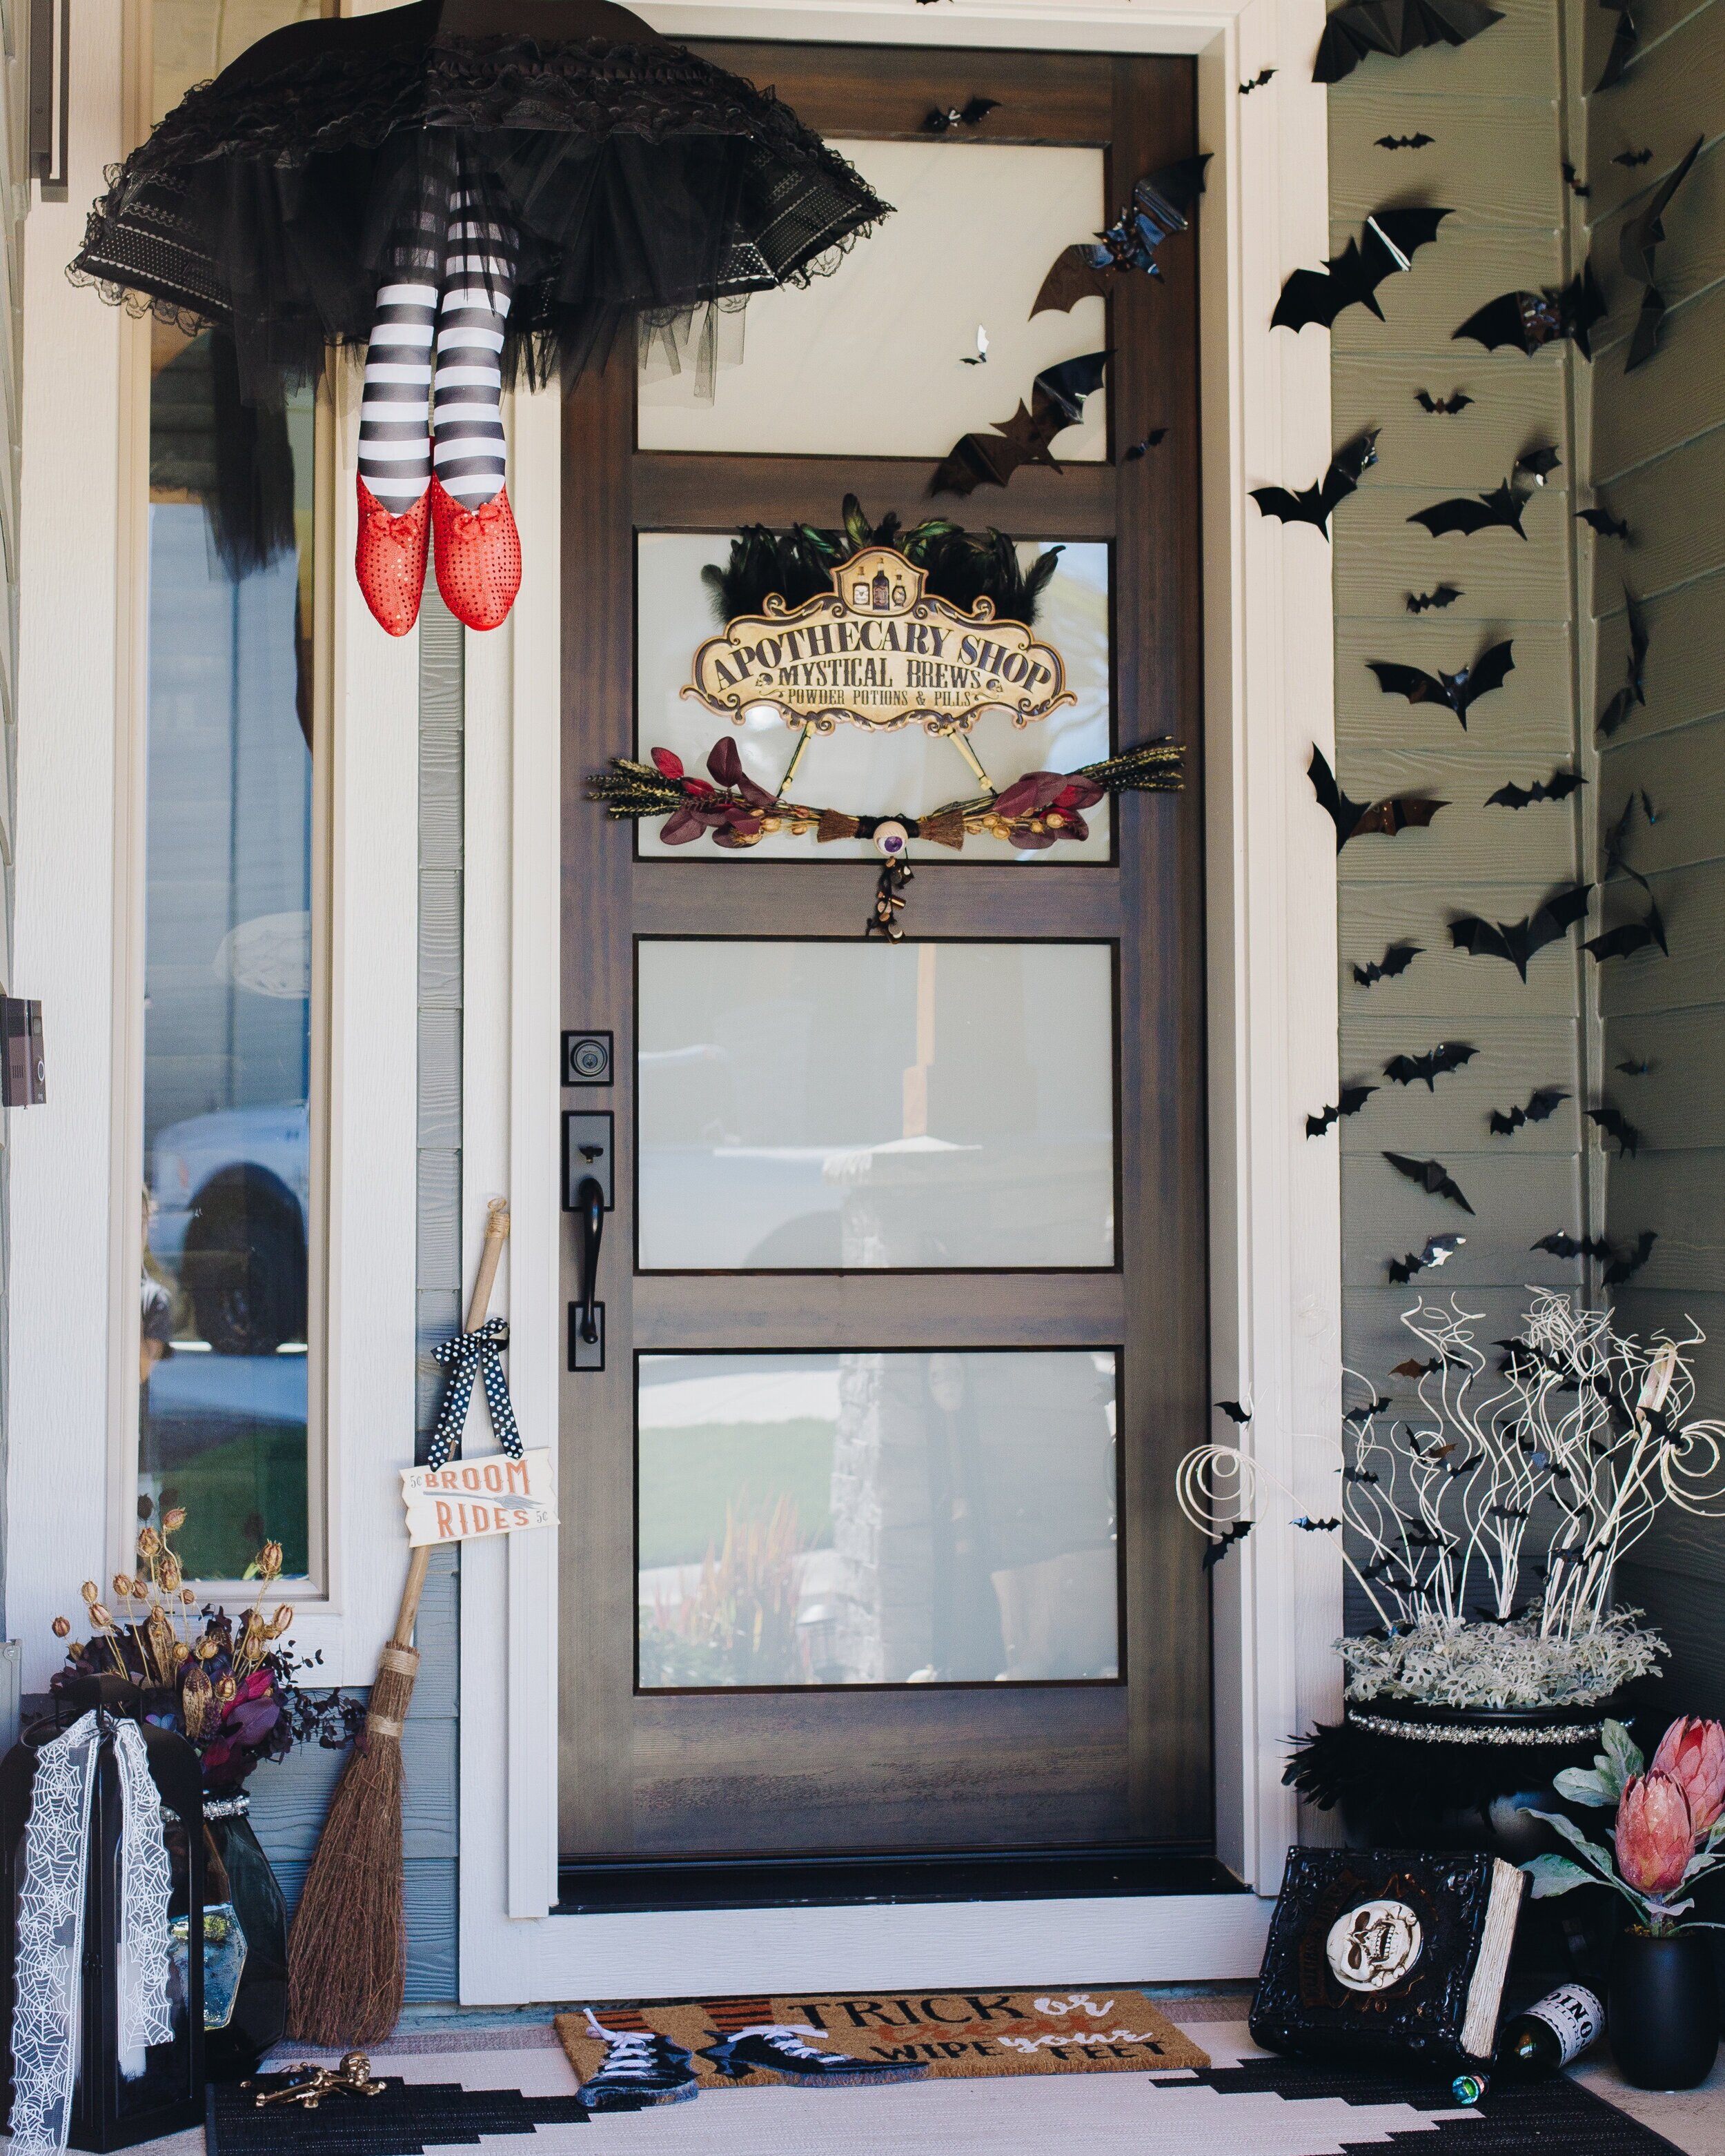 Spookify Your Stoop-Apothecary Shop